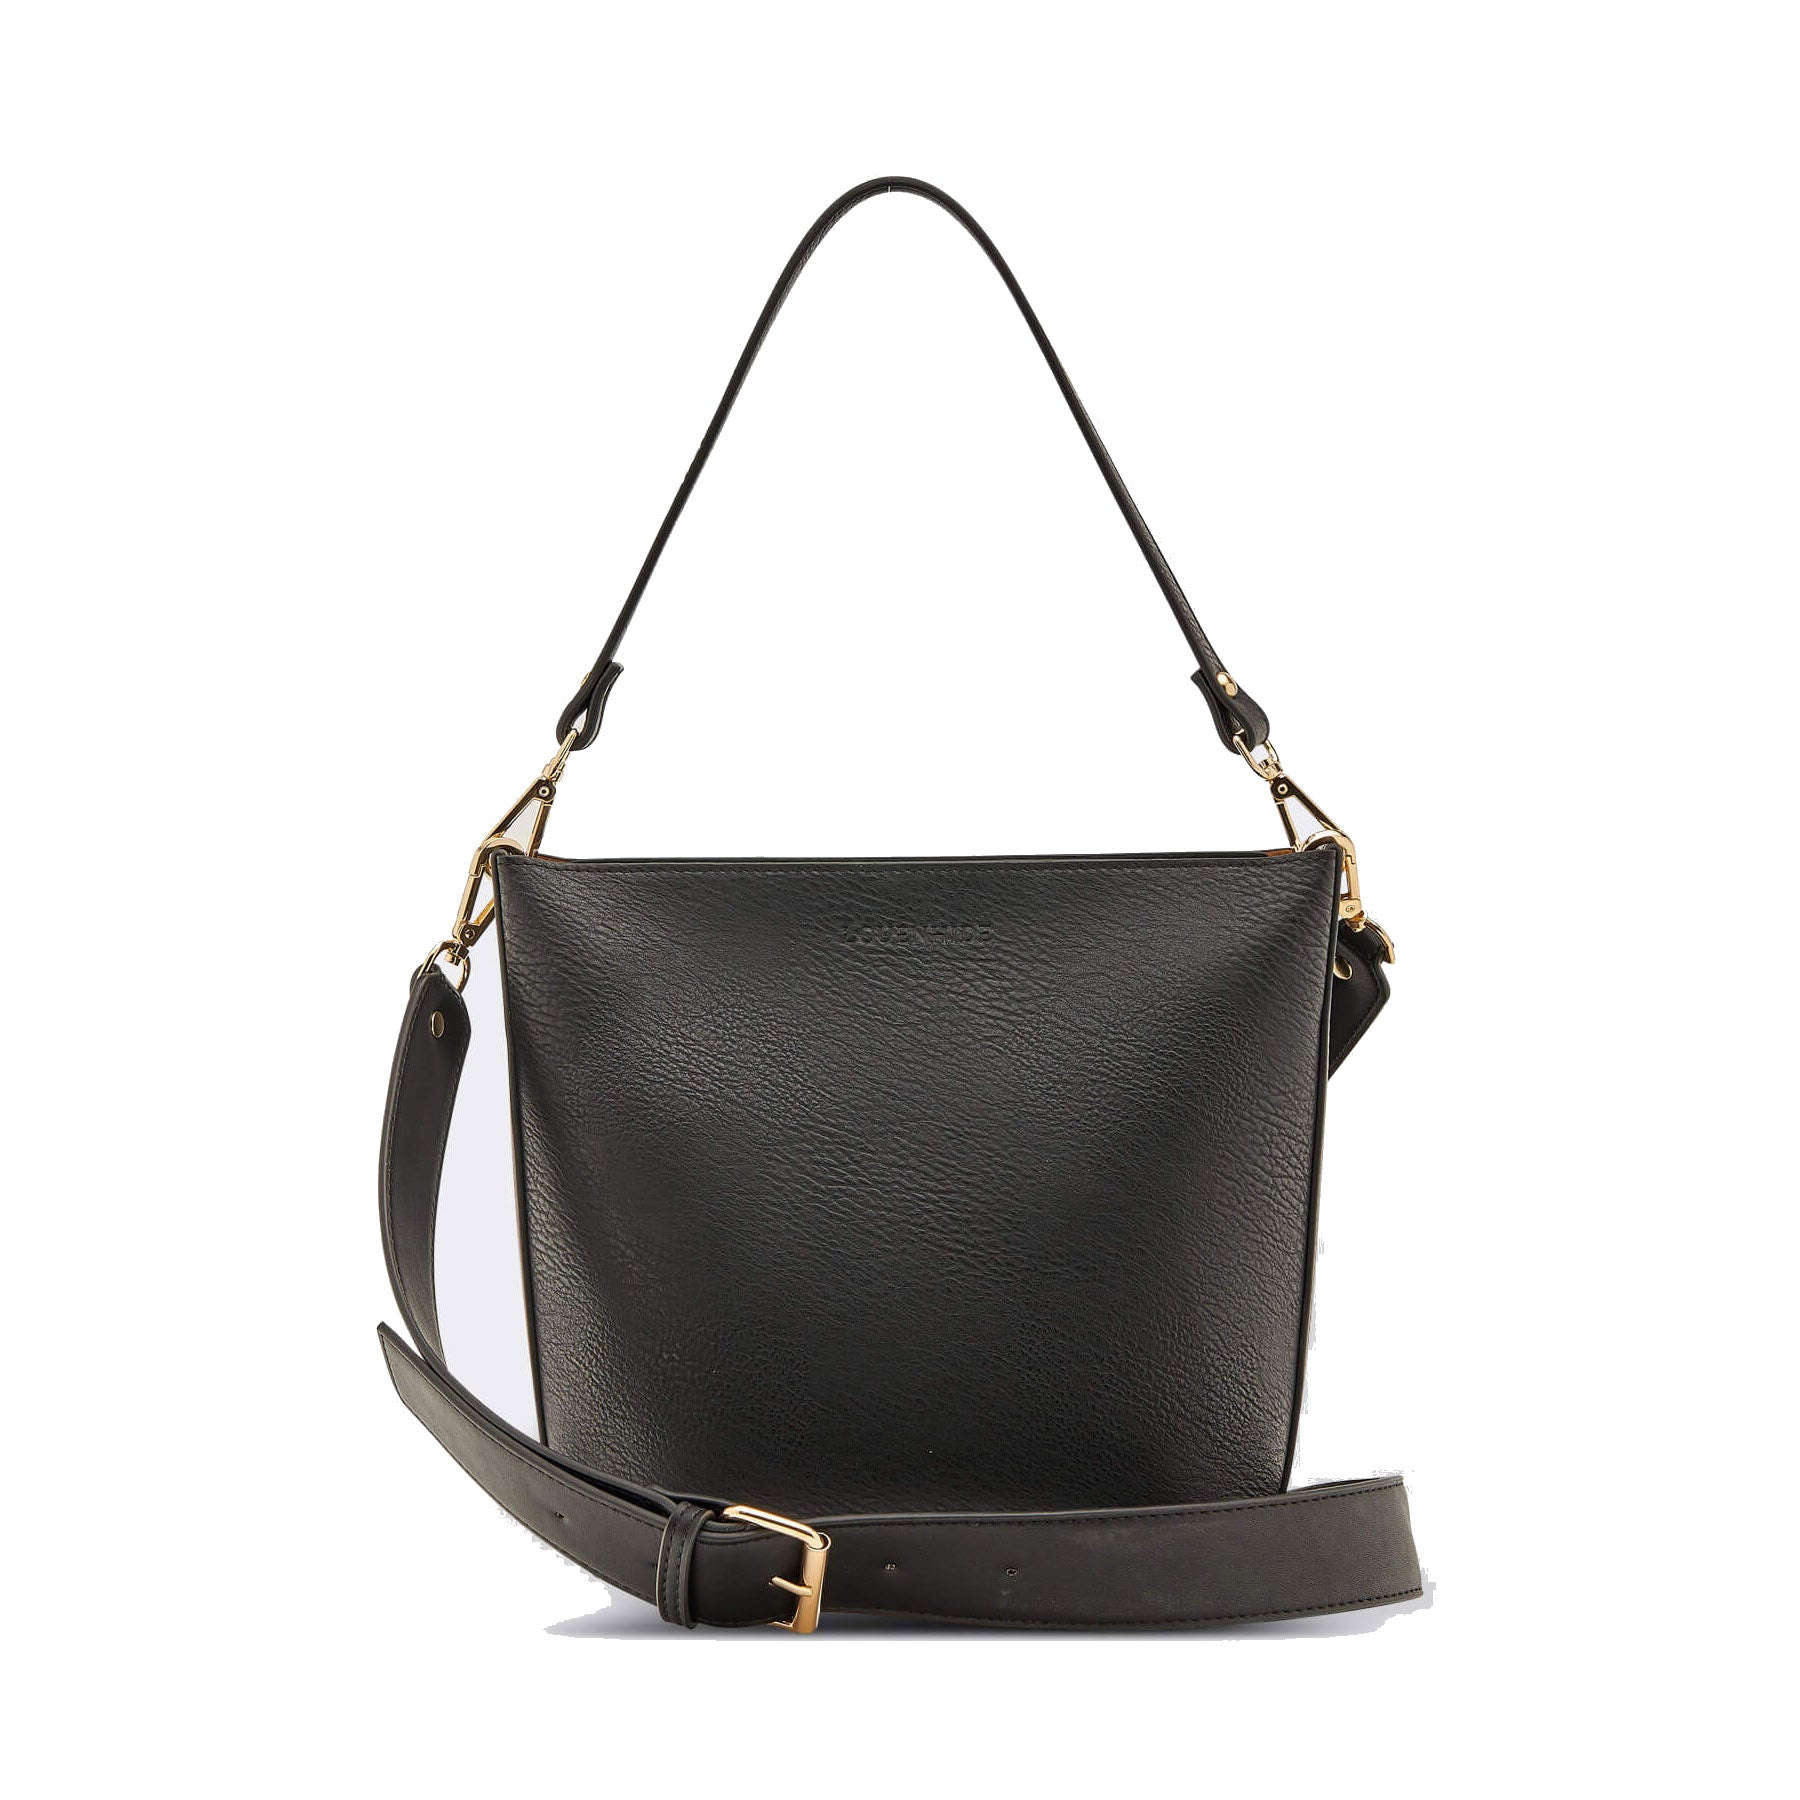 Louenhide Charlie Crossbody Black vegan leather shoulder bag with adjustable strap and gold-tone hardware, isolated on a white background.